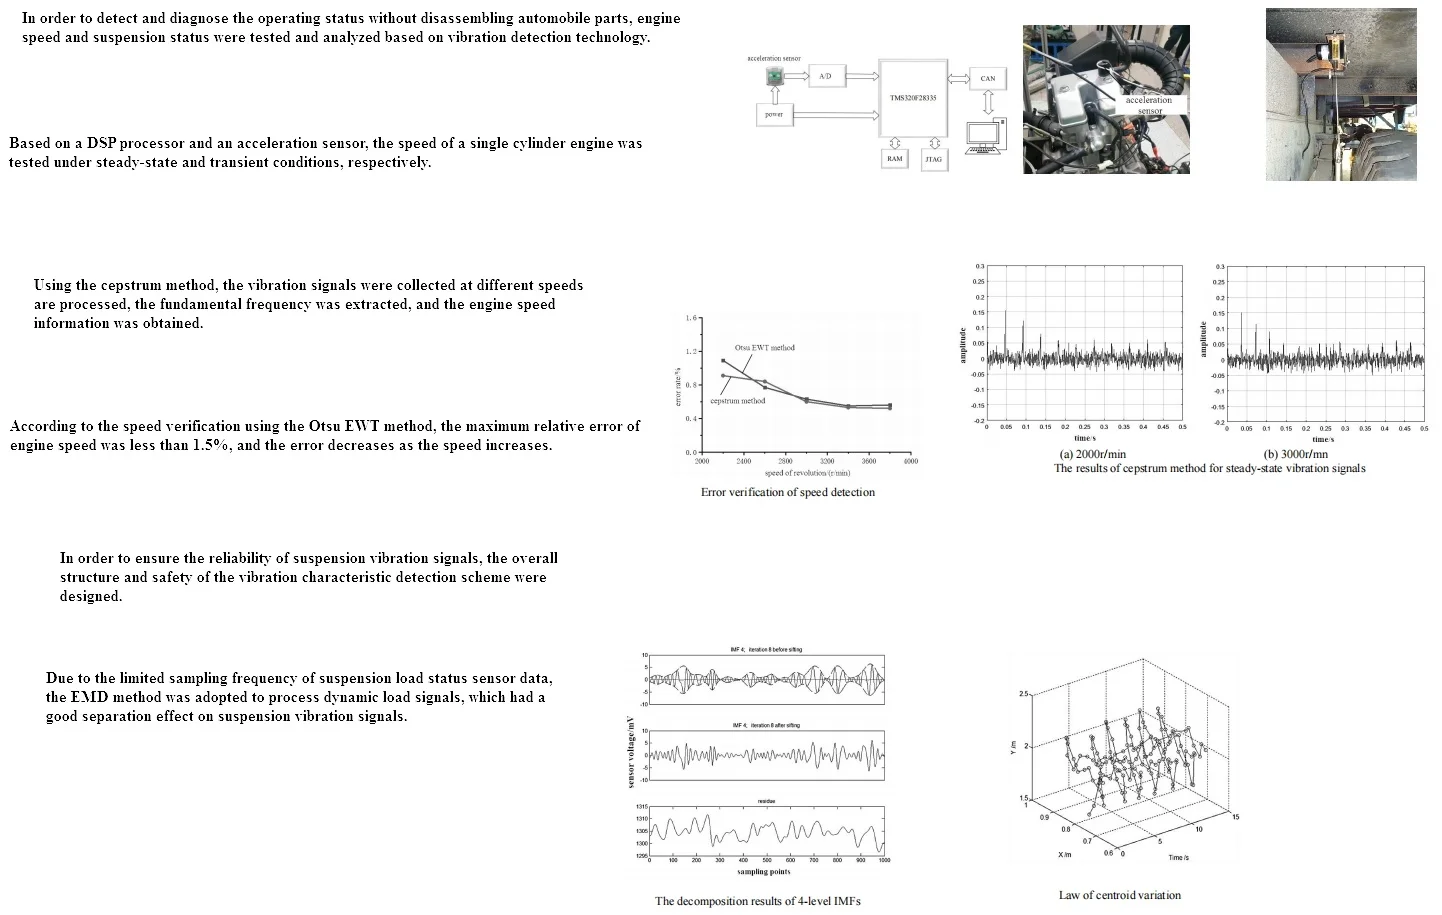 Analysis and prediction of automotive running status based on vibration detection system